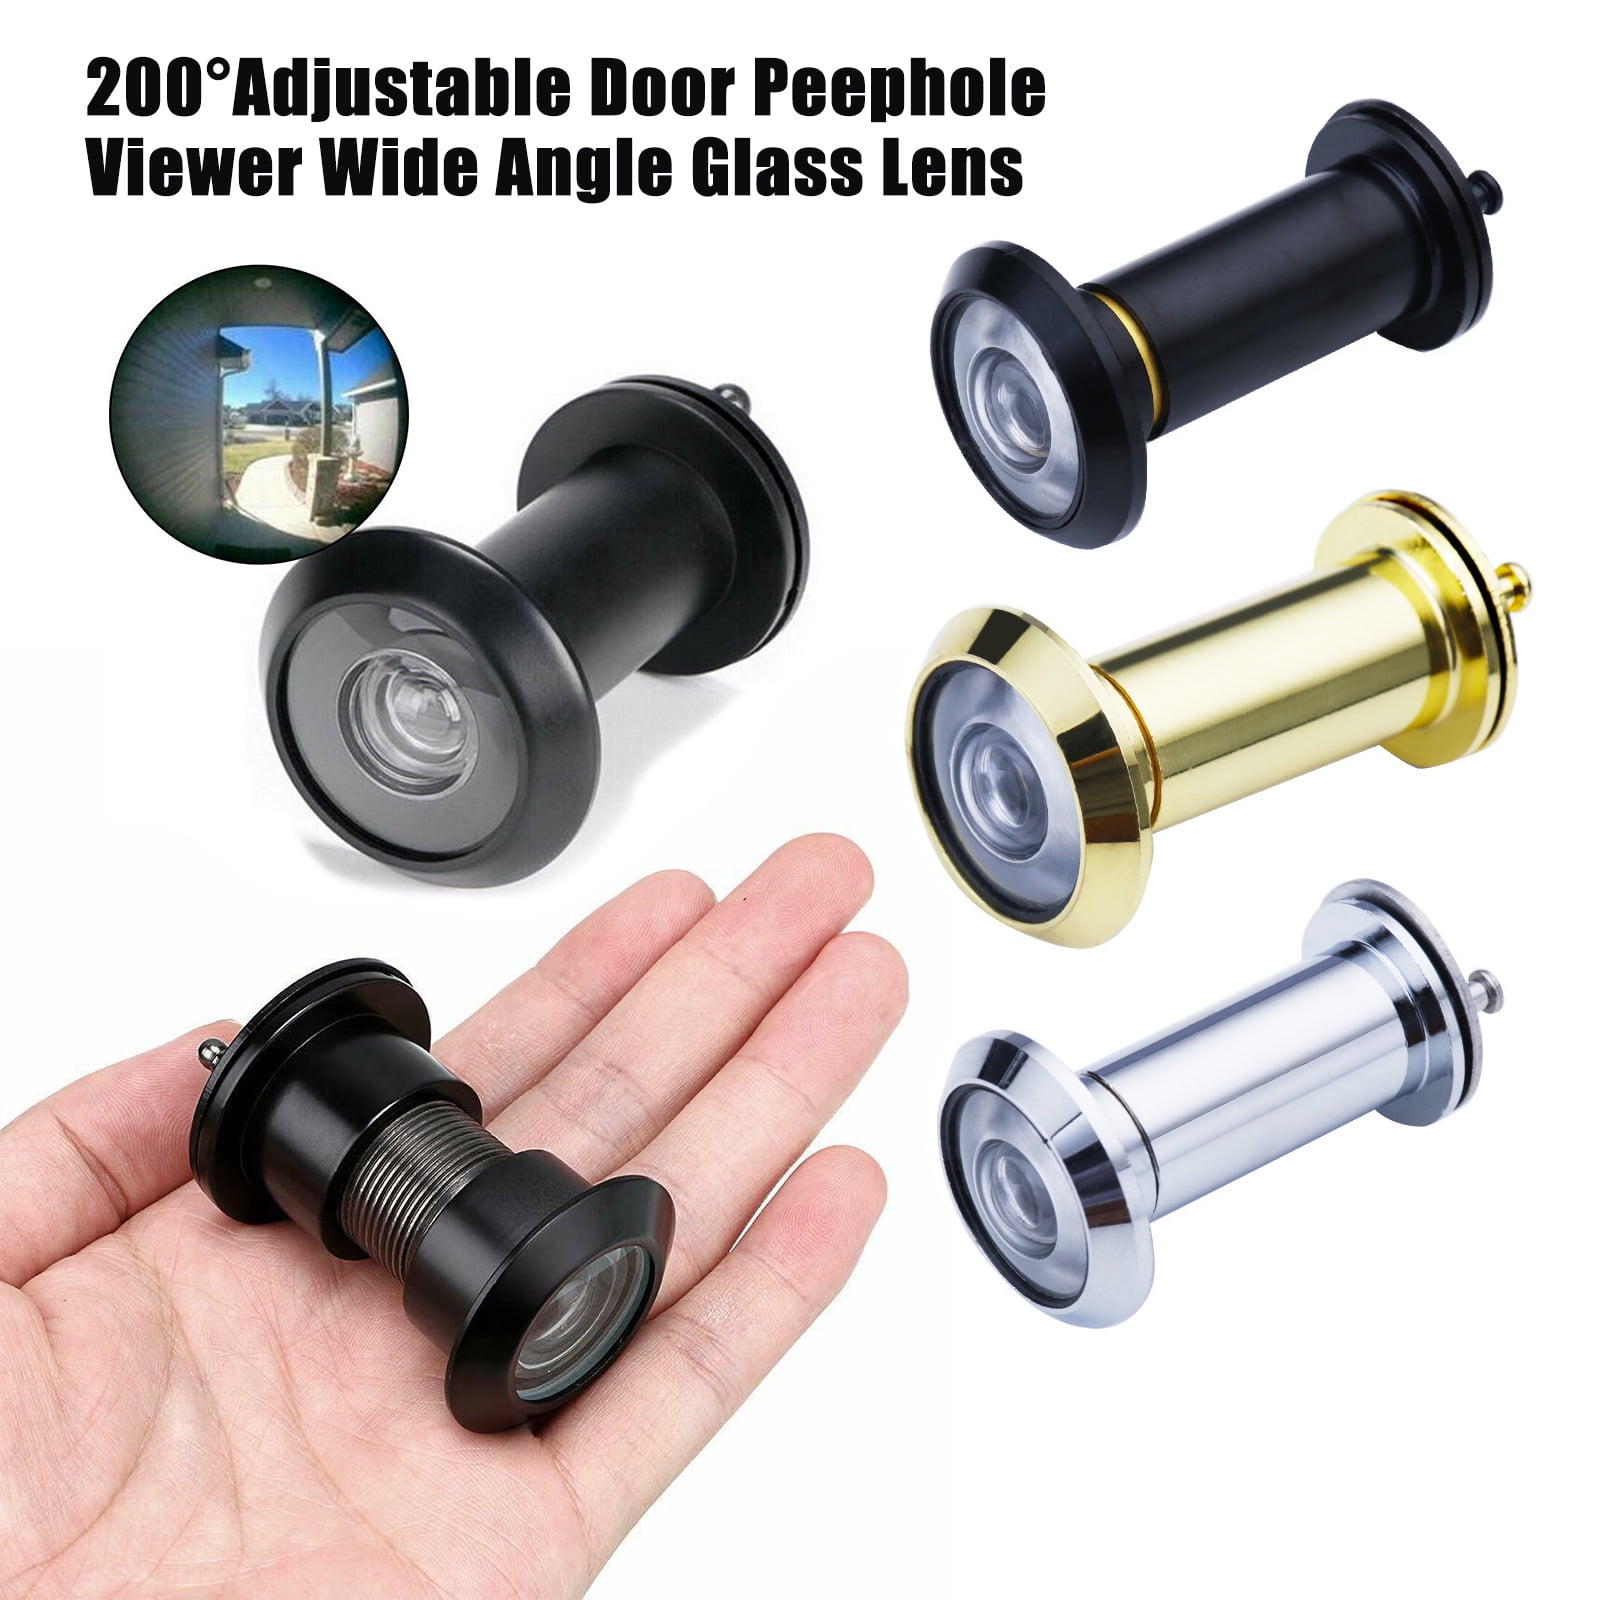 New 1.5" Flush Chrome Plated 160 Degree Angle Glass Fire Door Viewer Peephole 